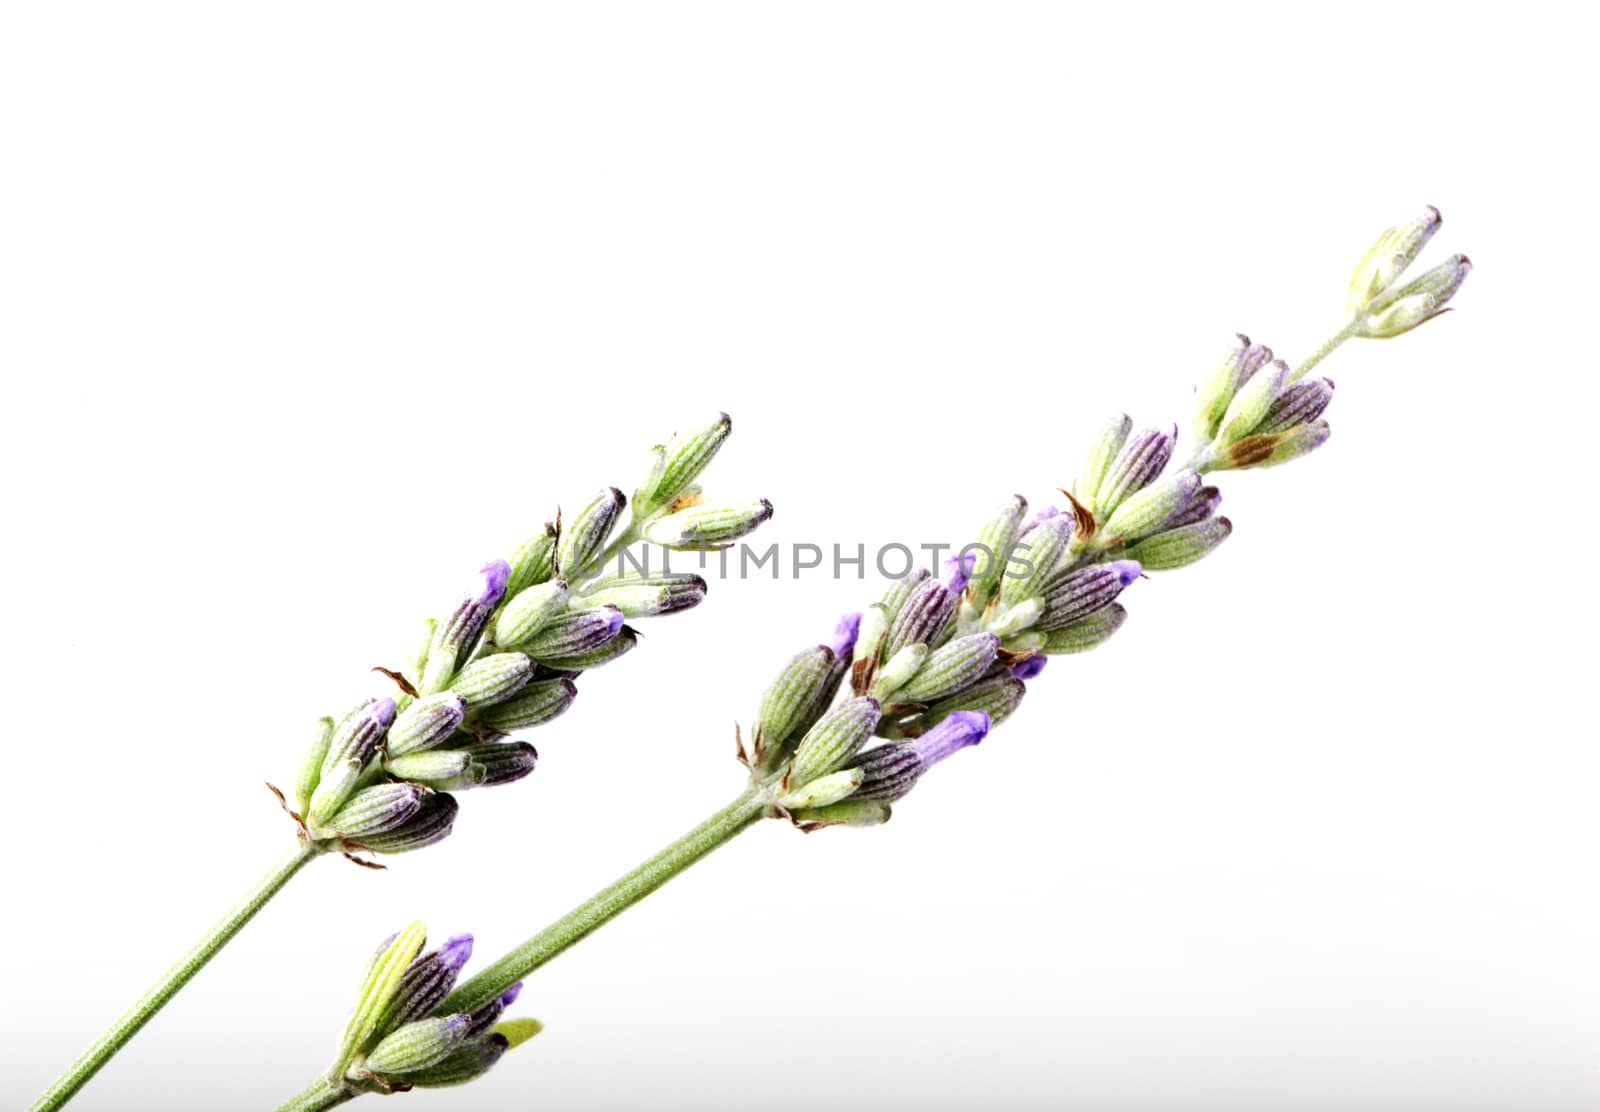 Close-Up Of Lavender Flower Against White Background by nenovbrothers